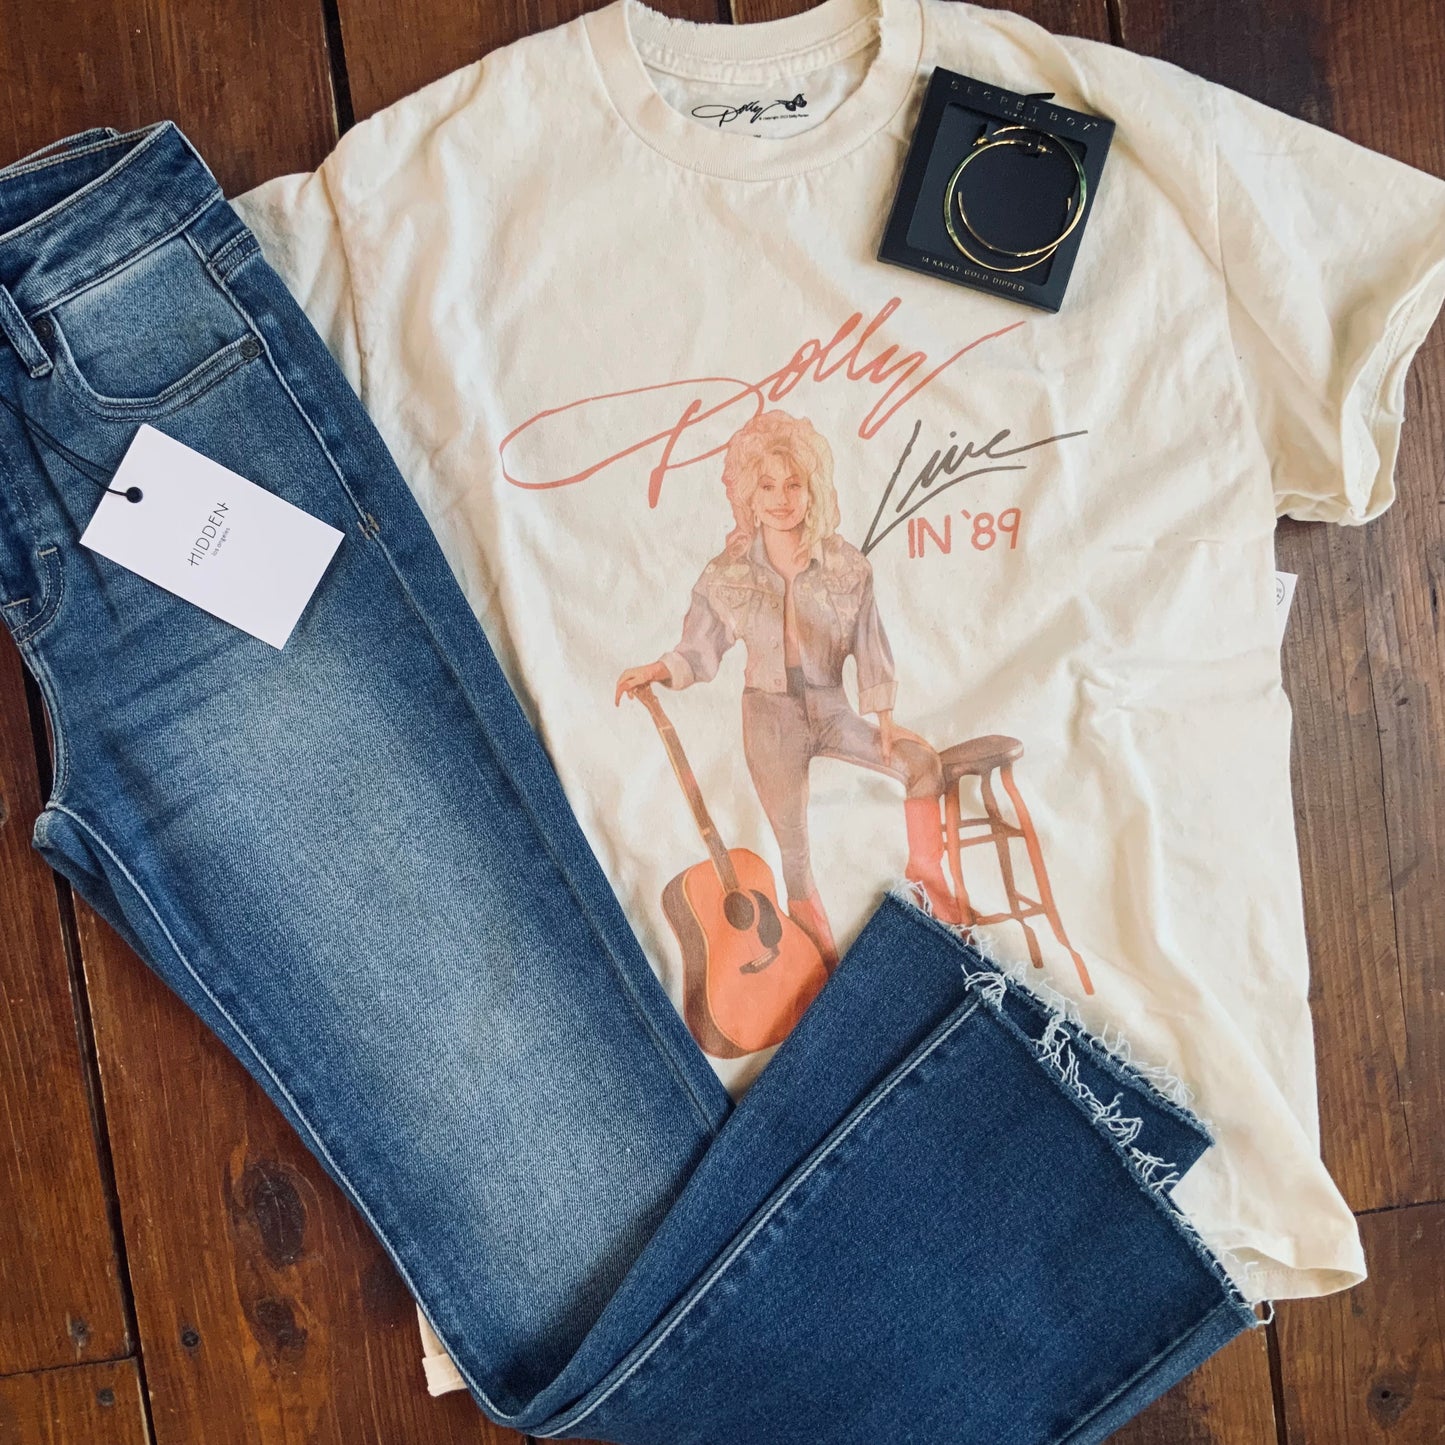 Dolly Parton Live in ‘89 Tee